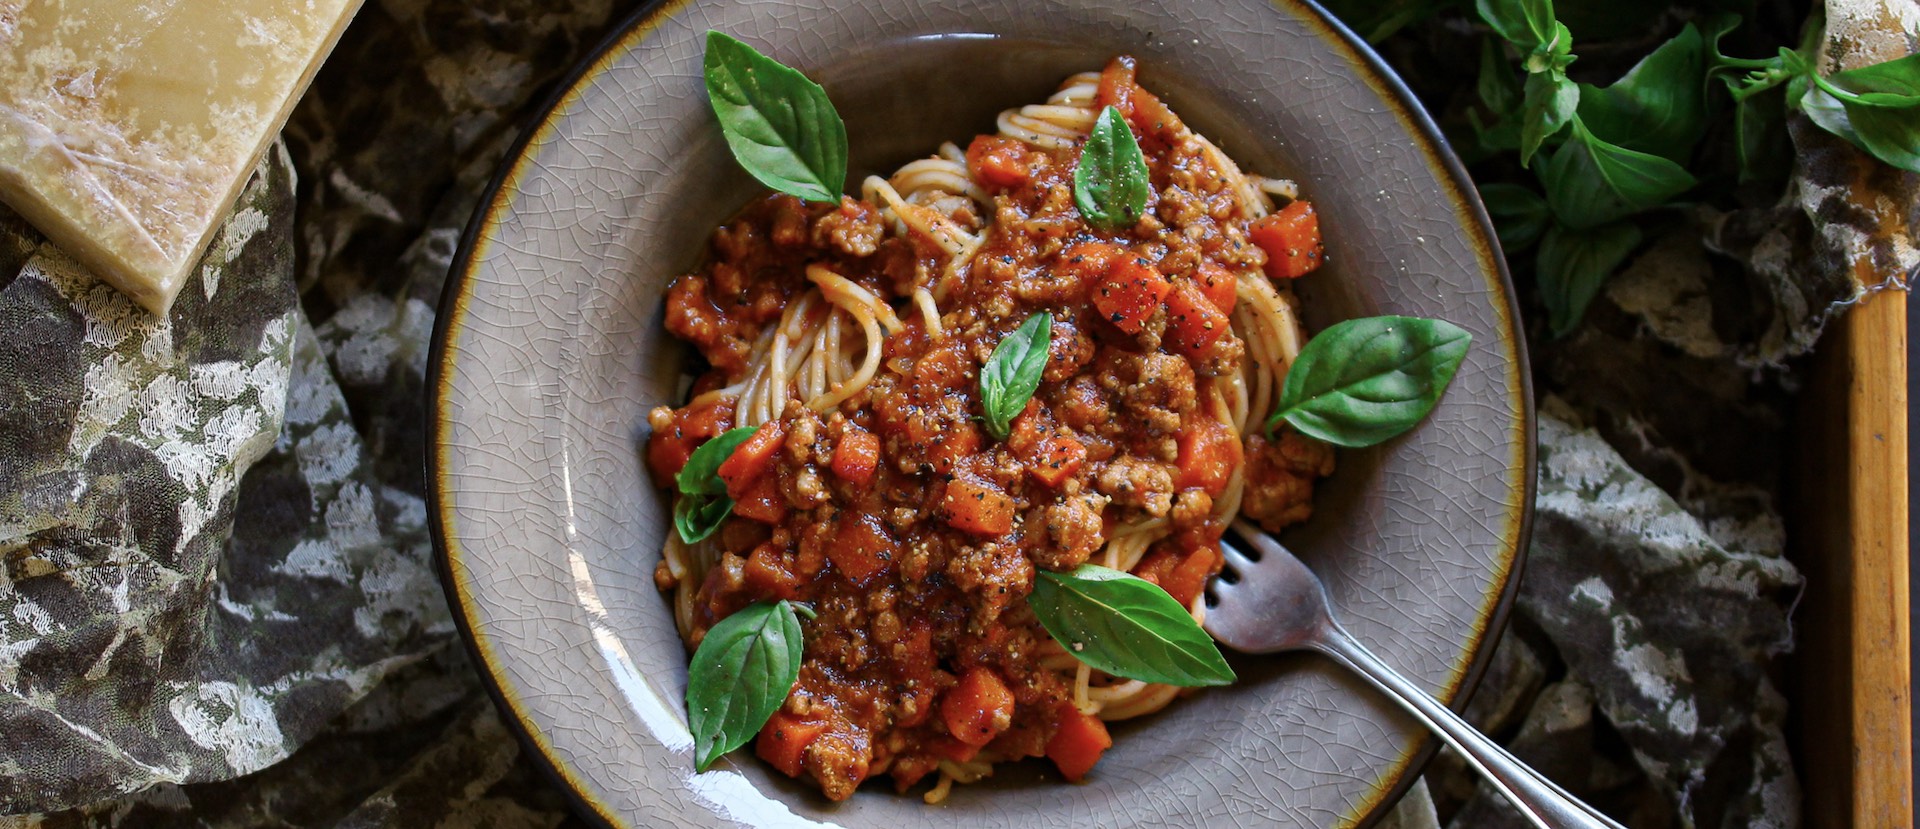 Spaghetti Bolognese With Carrots